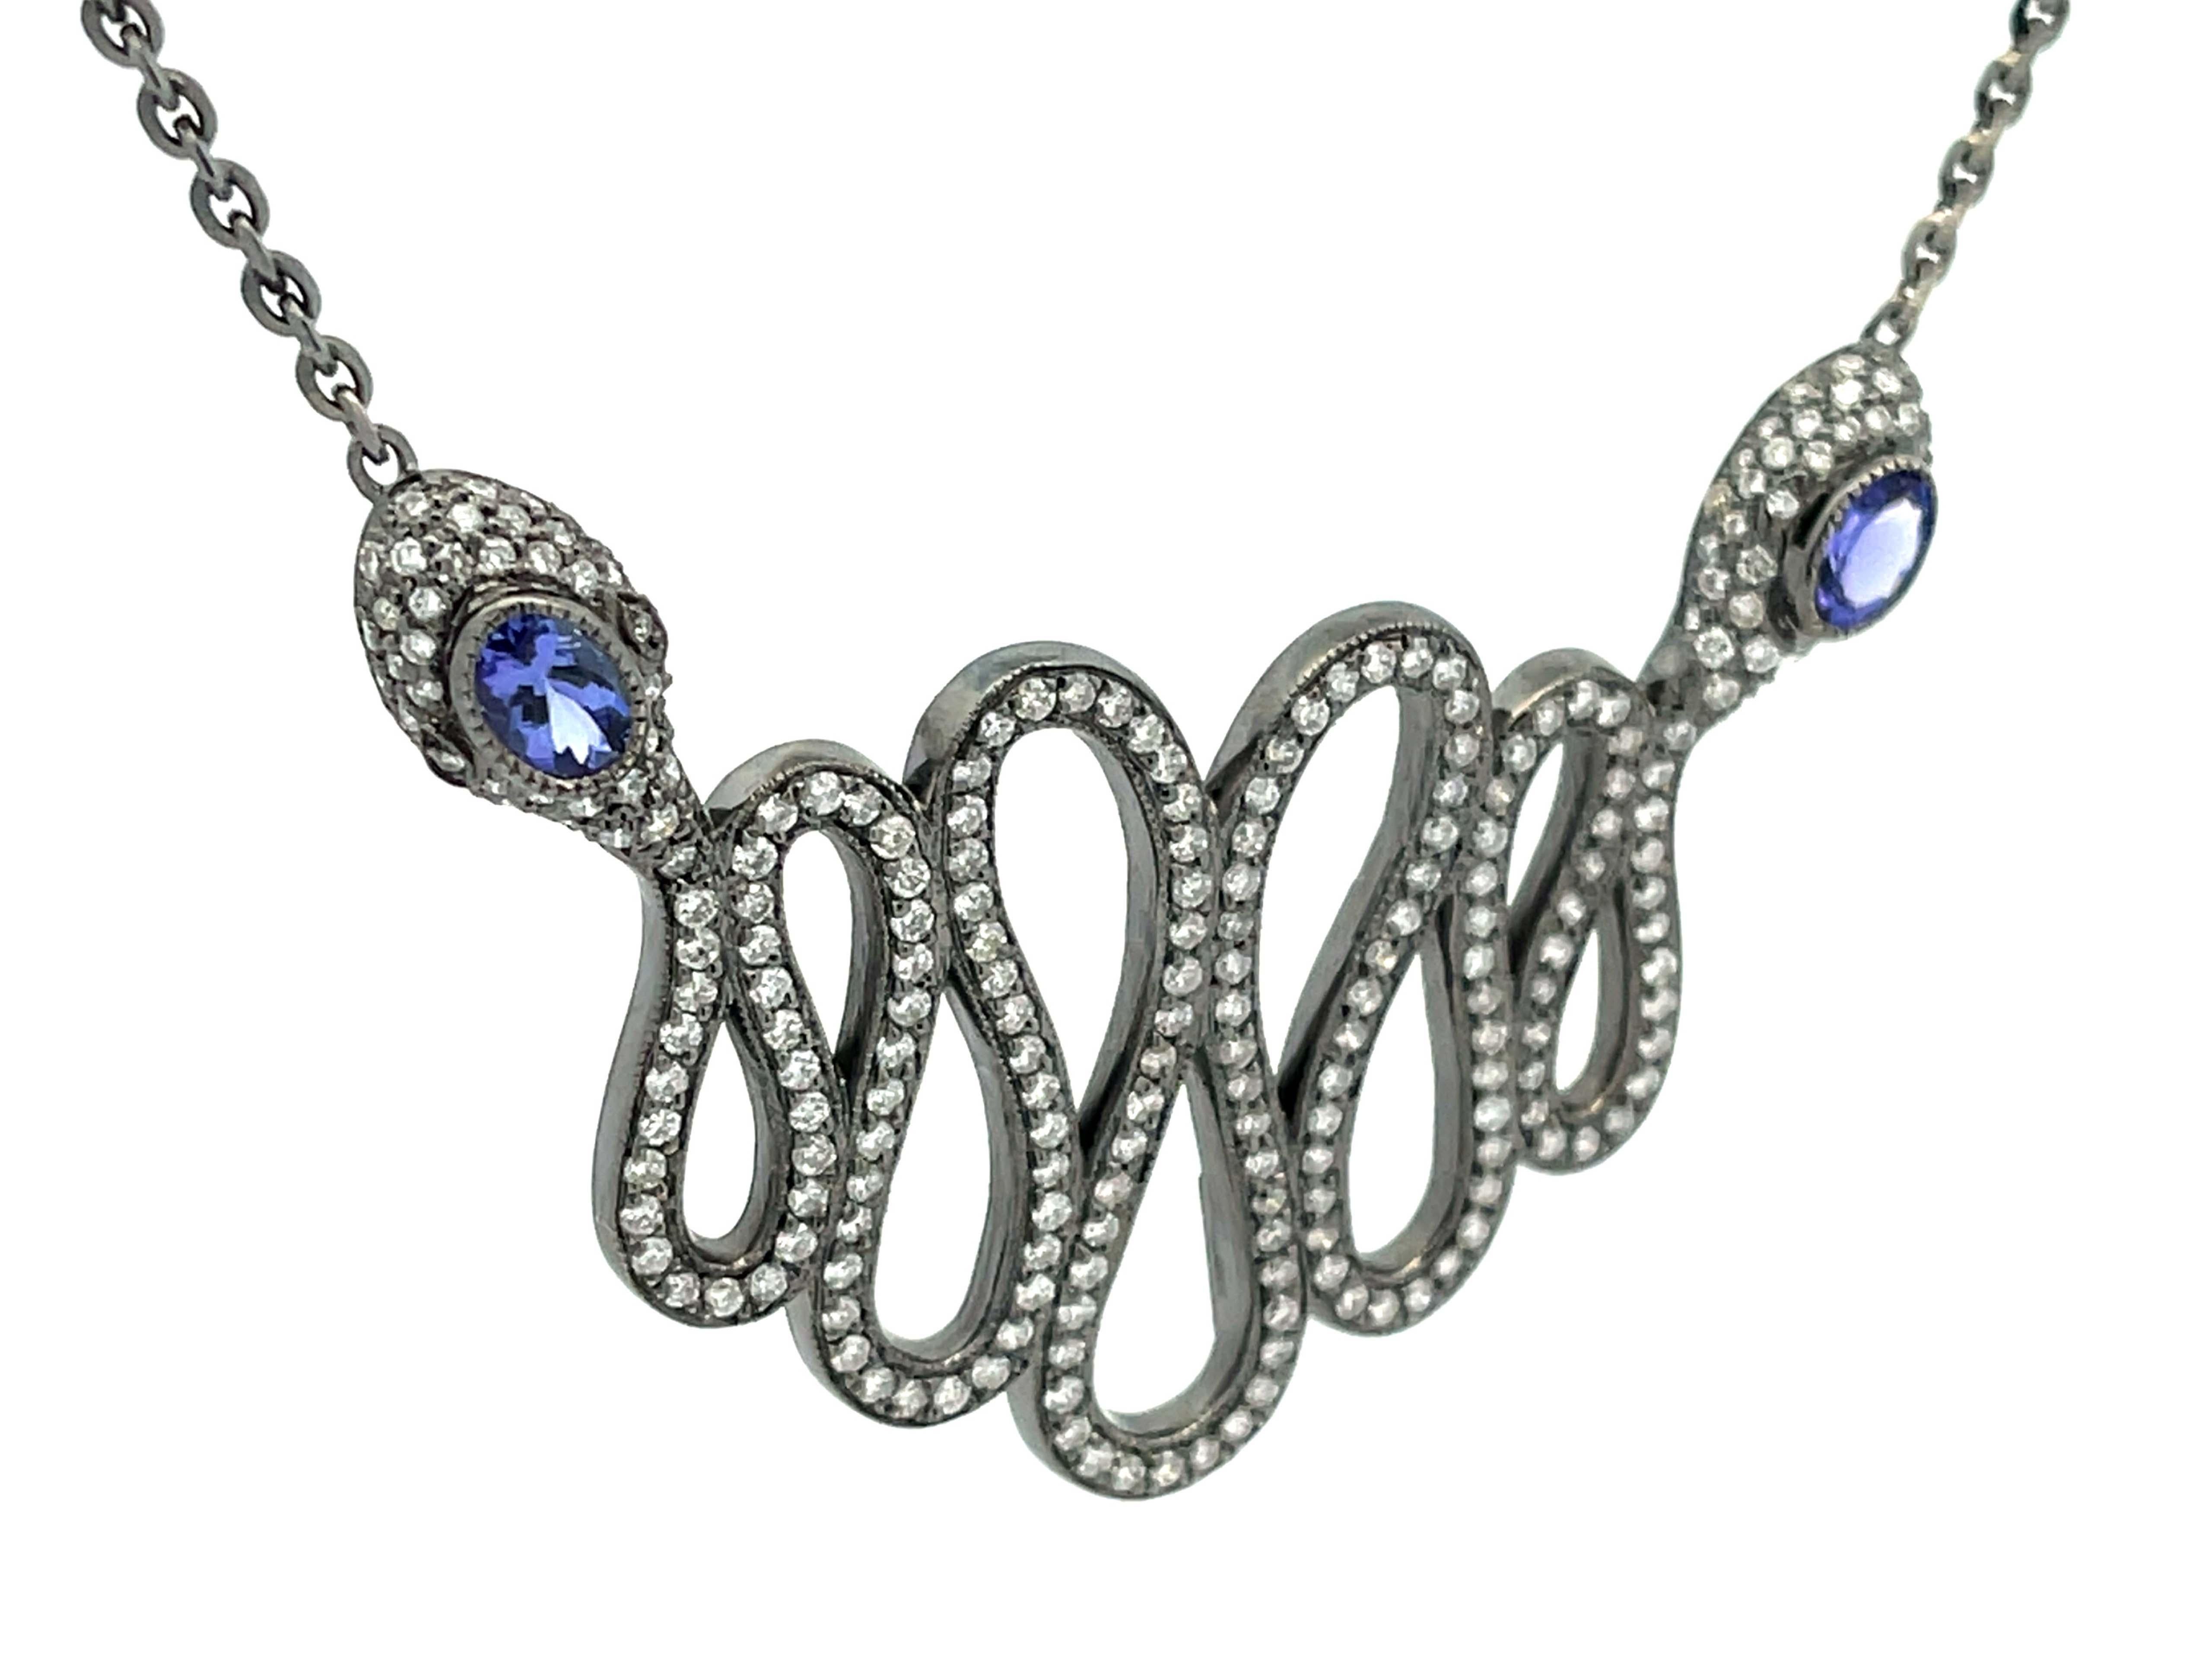 Snake Necklace with Diamonds and Tanzanite in 18k Black Gold In New Condition For Sale In Honolulu, HI